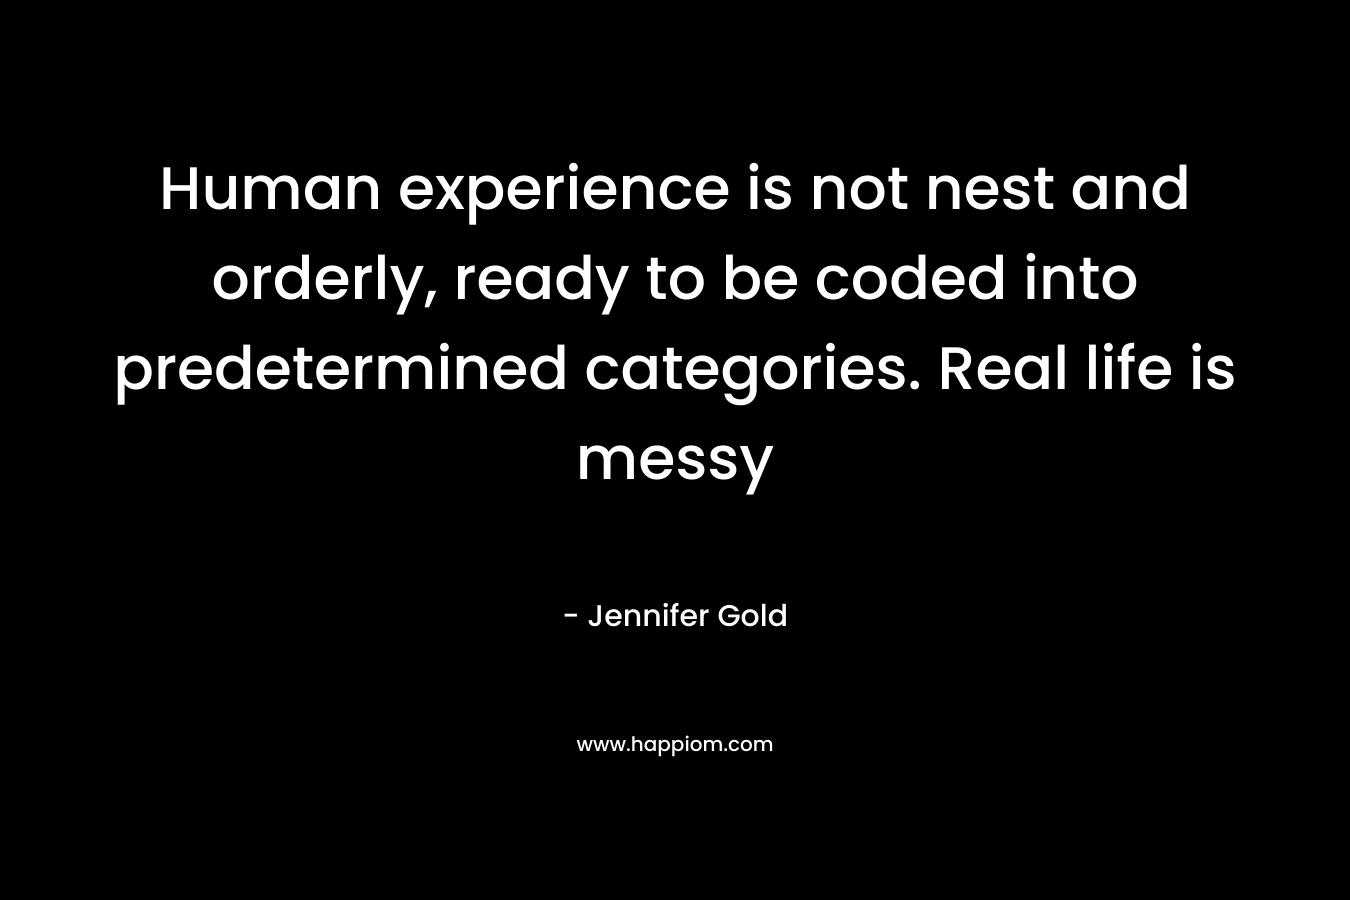 Human experience is not nest and orderly, ready to be coded into predetermined categories. Real life is messy – Jennifer Gold